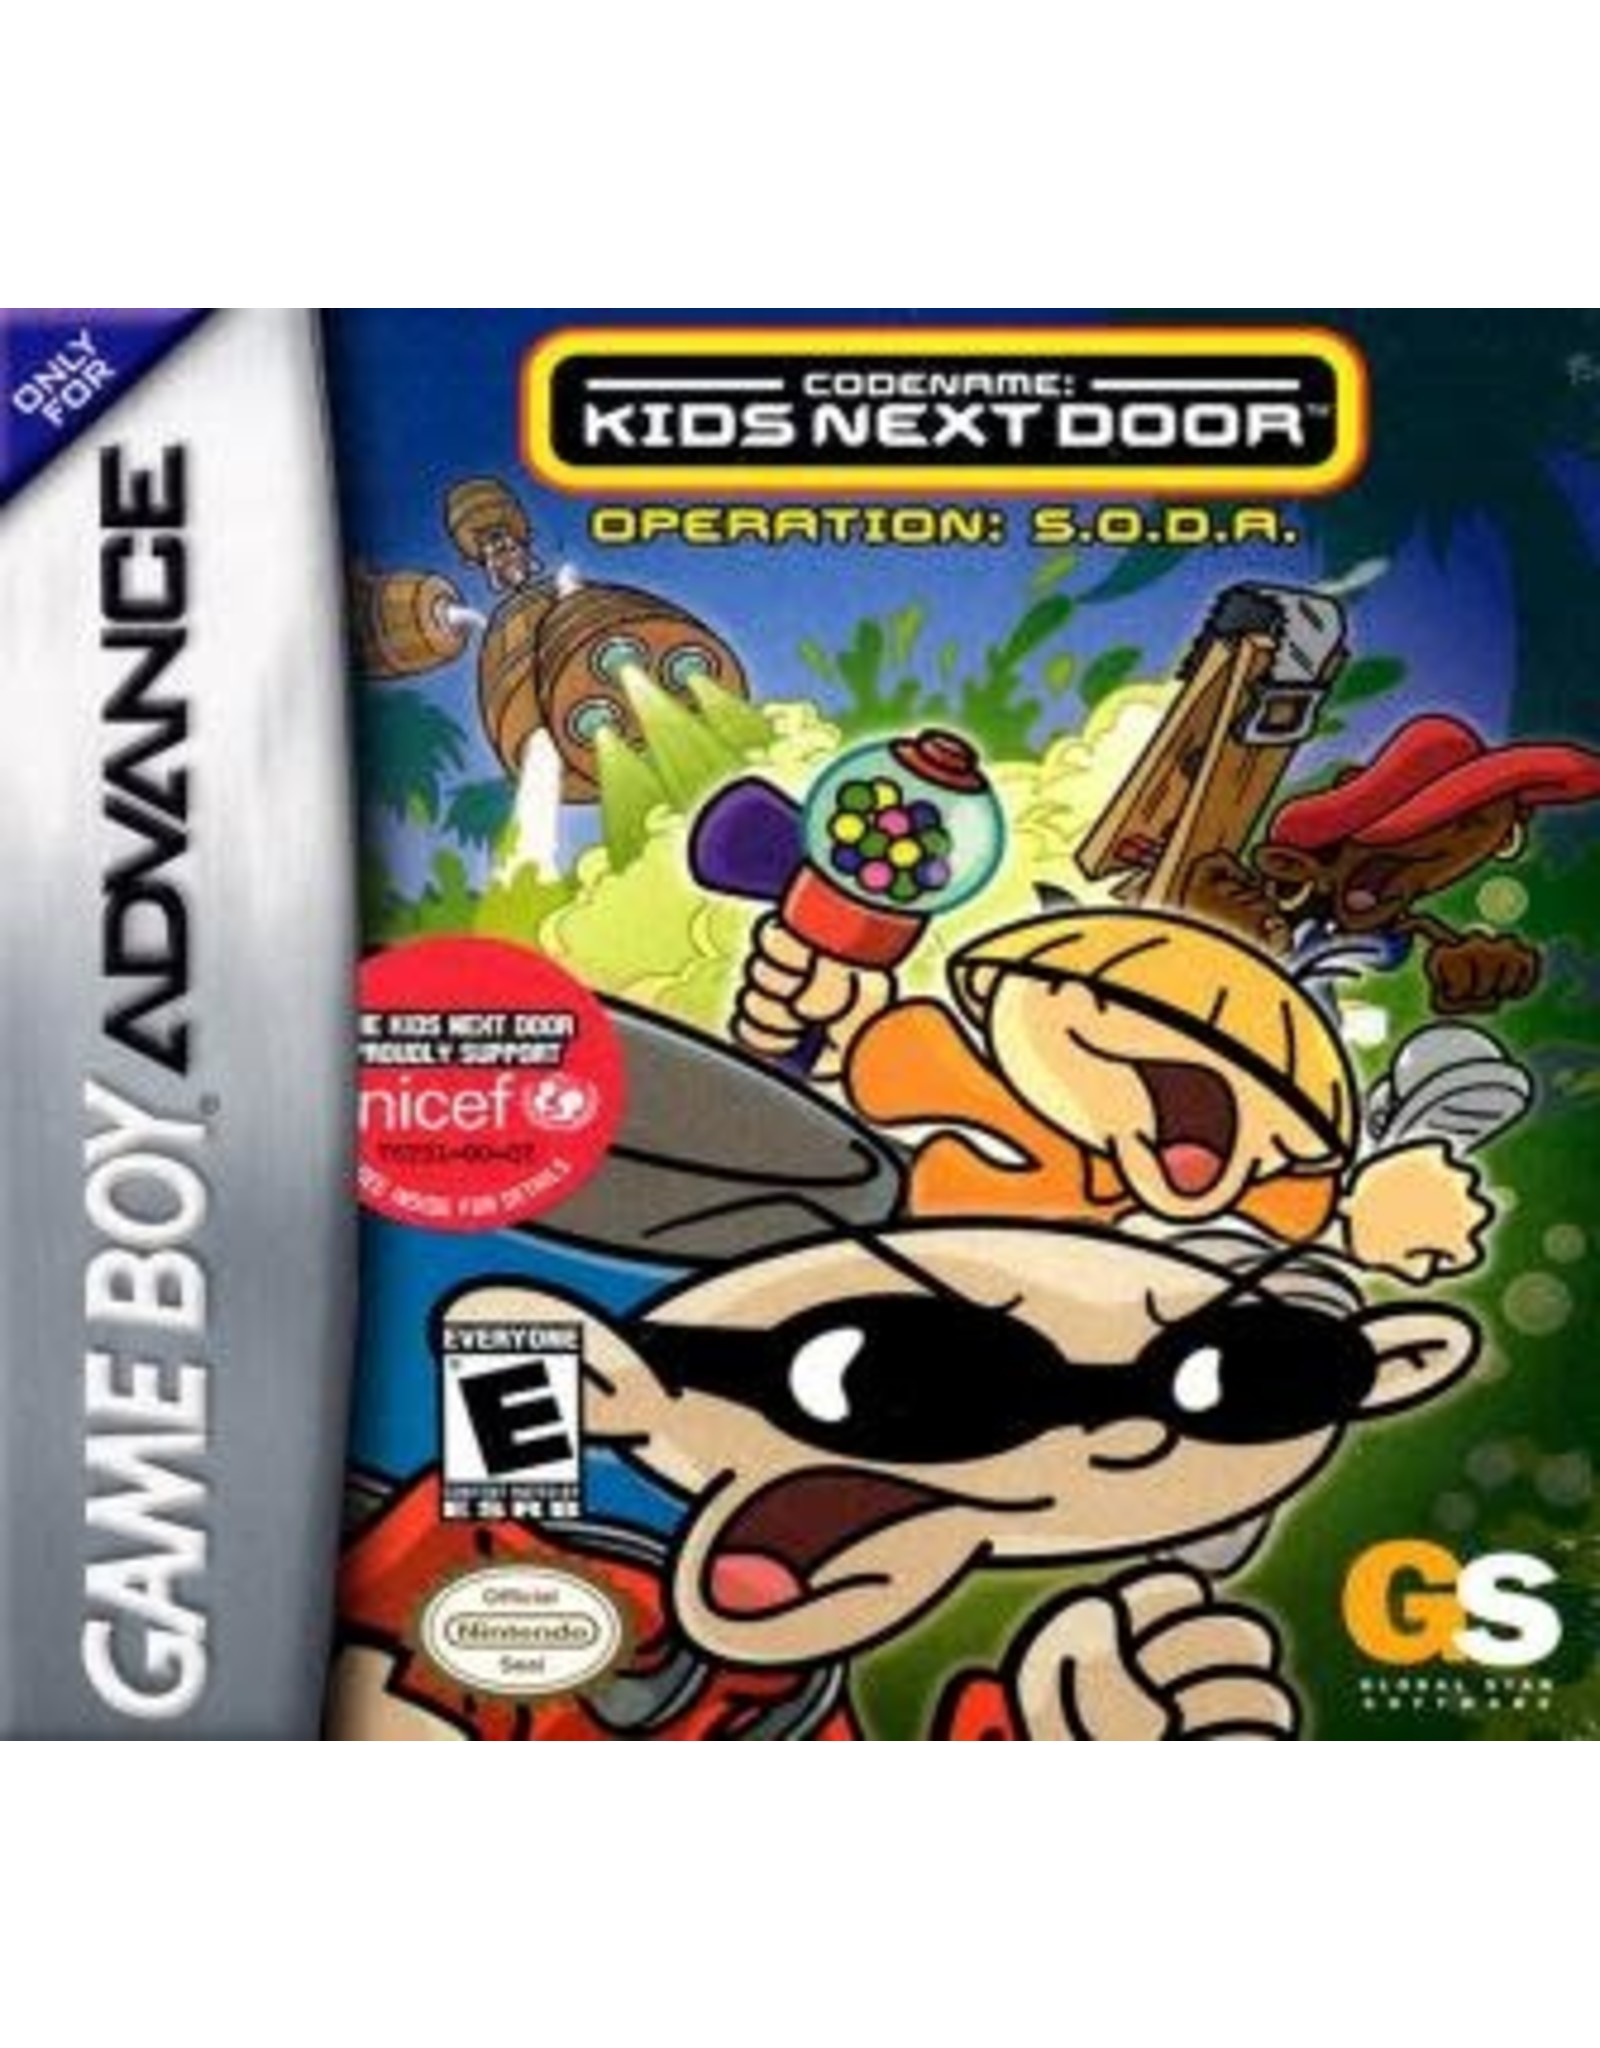 Game Boy Advance Codename Kids Next Door Operation SODA (Used, Cart Only)